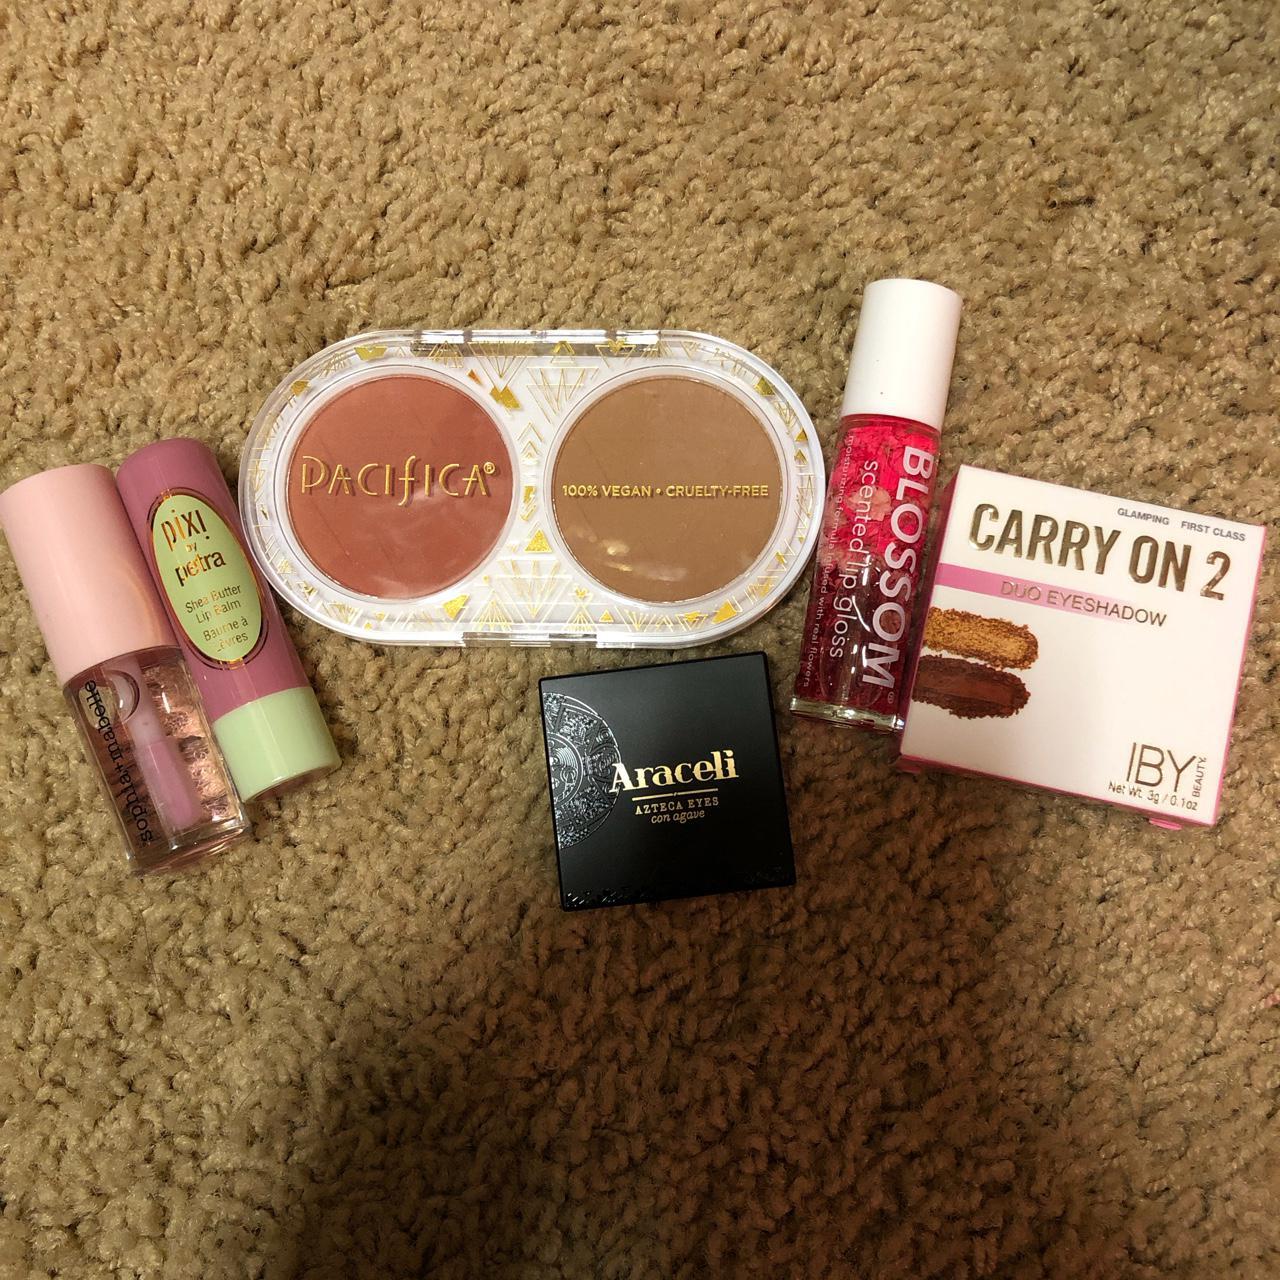 Product Image 1 - makeup bundle!!
BLOSSOM LIPGLOSS NOT INCLUDED,